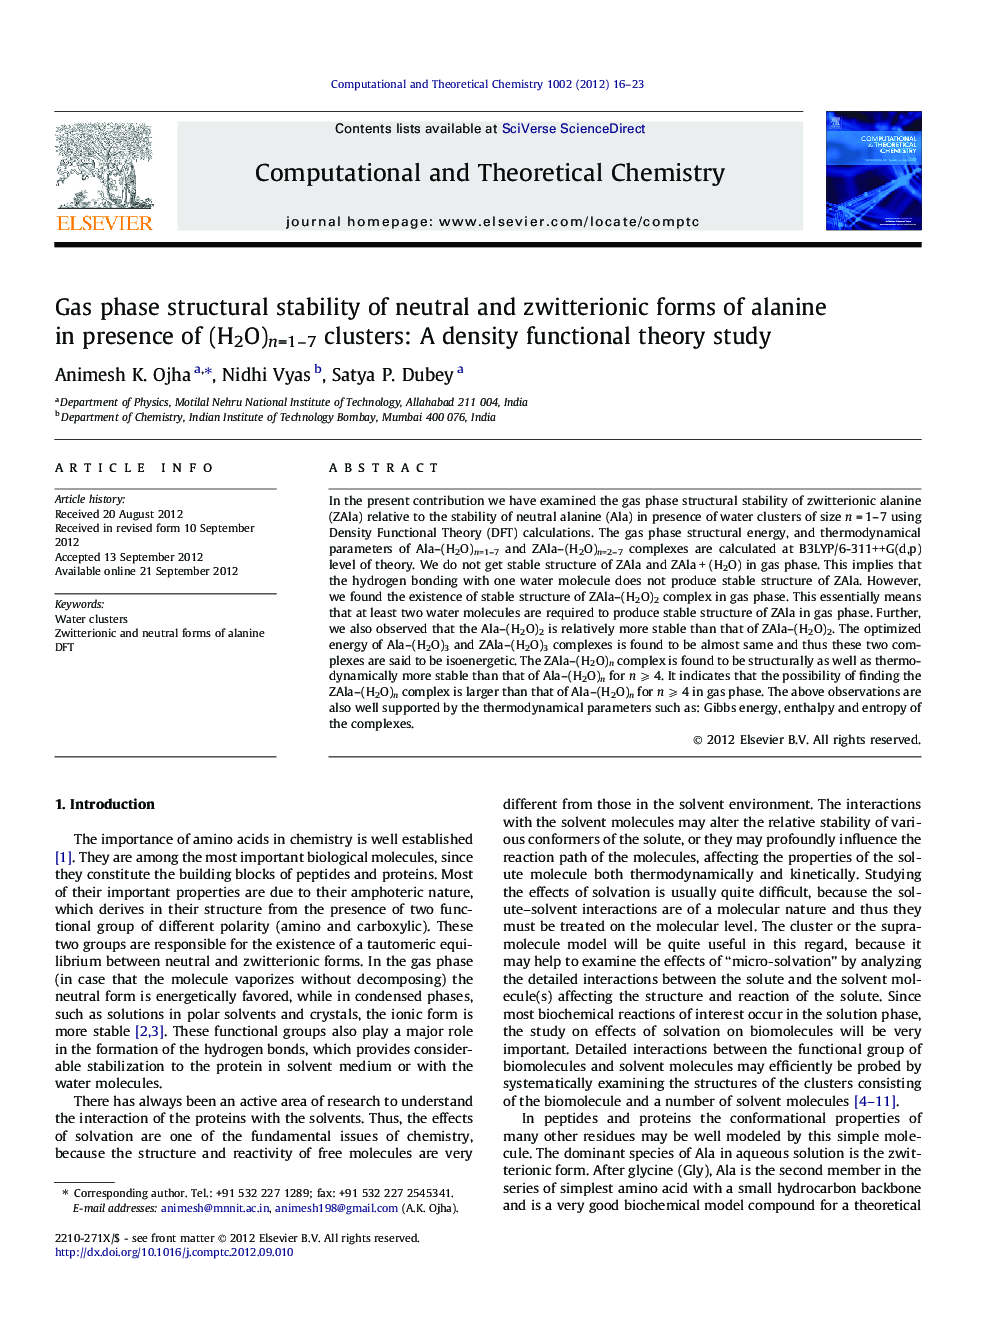 Gas phase structural stability of neutral and zwitterionic forms of alanine in presence of (H2O)n=1-7 clusters: A density functional theory study